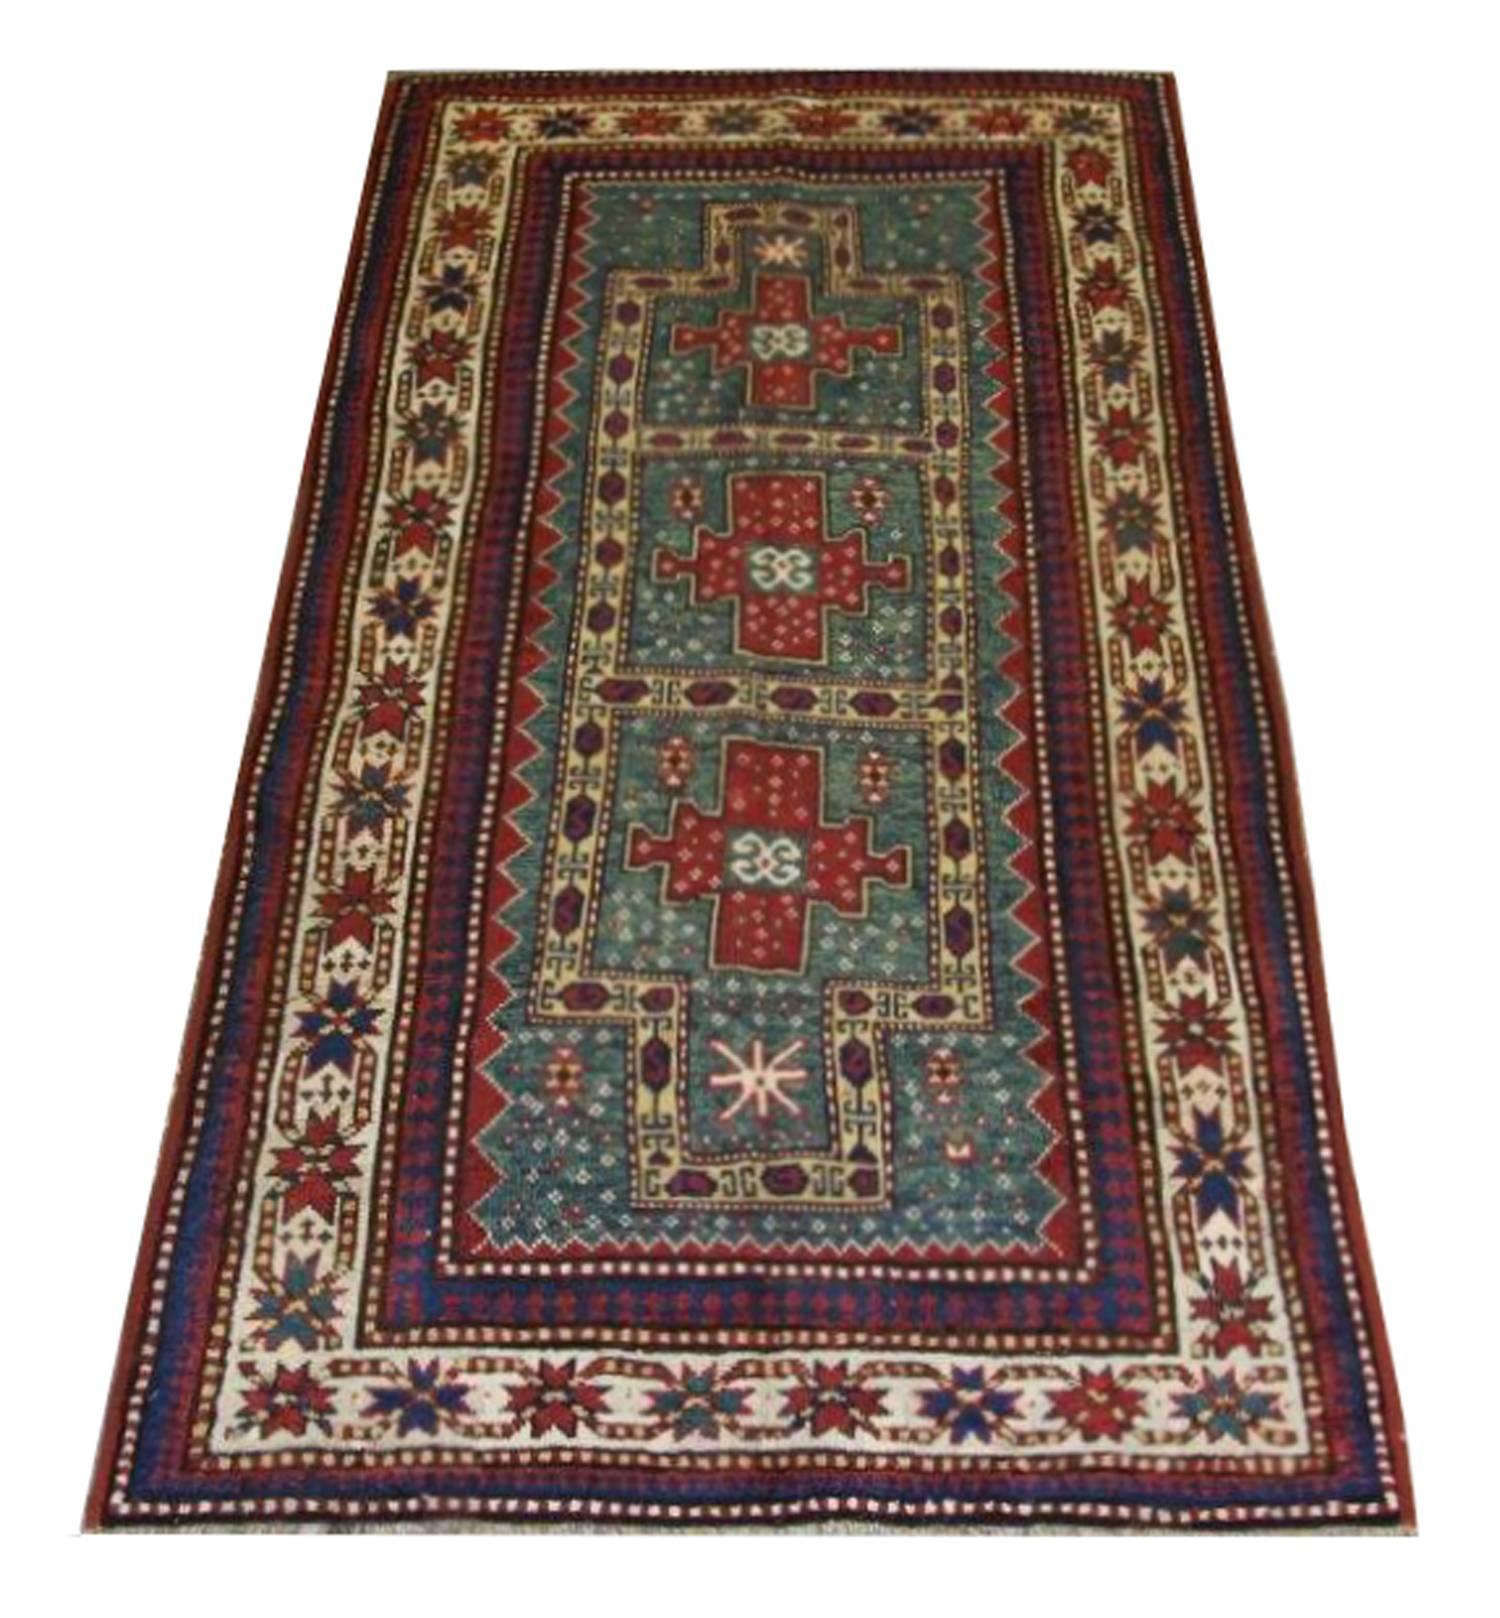 Antique handmade carpet Caucasian Kazak, circa the 1900s, oriental rugs design. The city of Kazak is located on the western republic of Azerbaijan which is famous for producing fantastic Patterned rugs from the 18th century onwards using vibrant